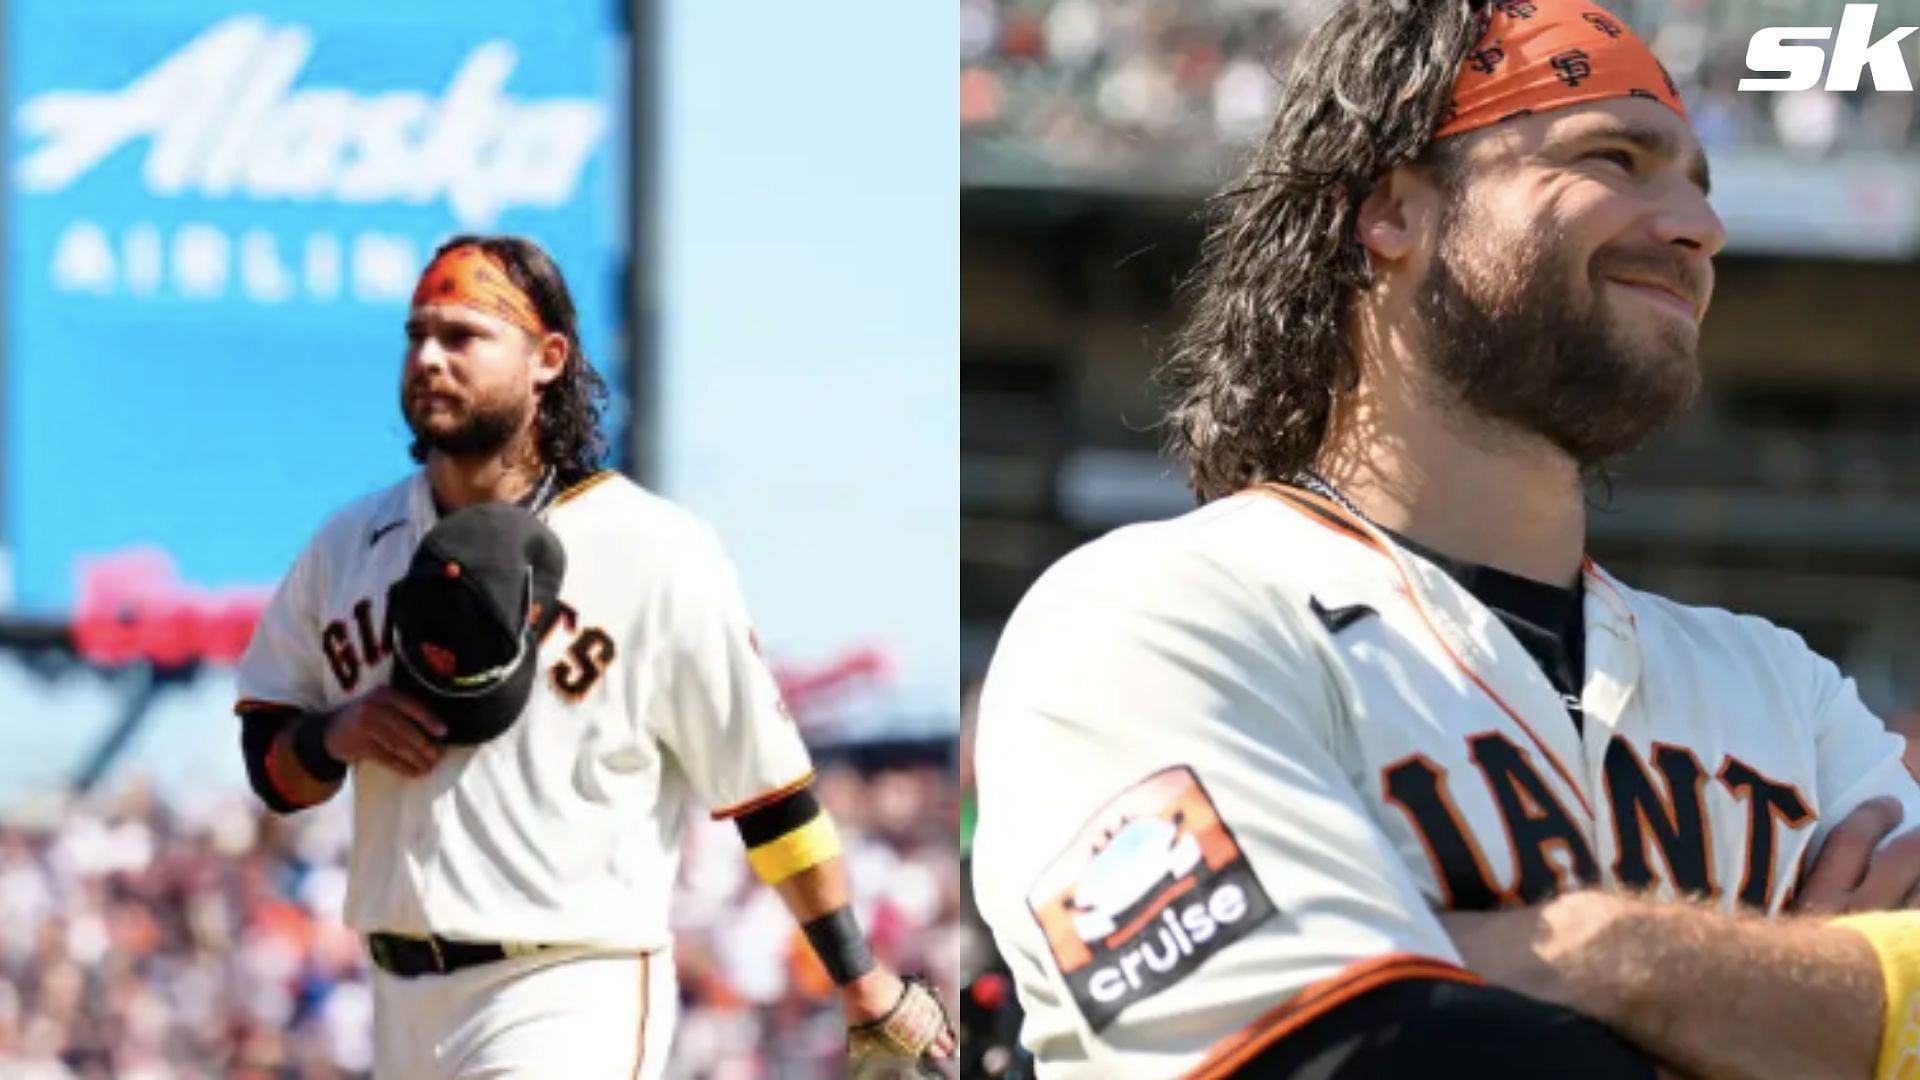 &quot;Our family of 7 is complete&quot; - Giants shortstop Brandon Crawford celebrates arrival of baby girl with wife Jalynne